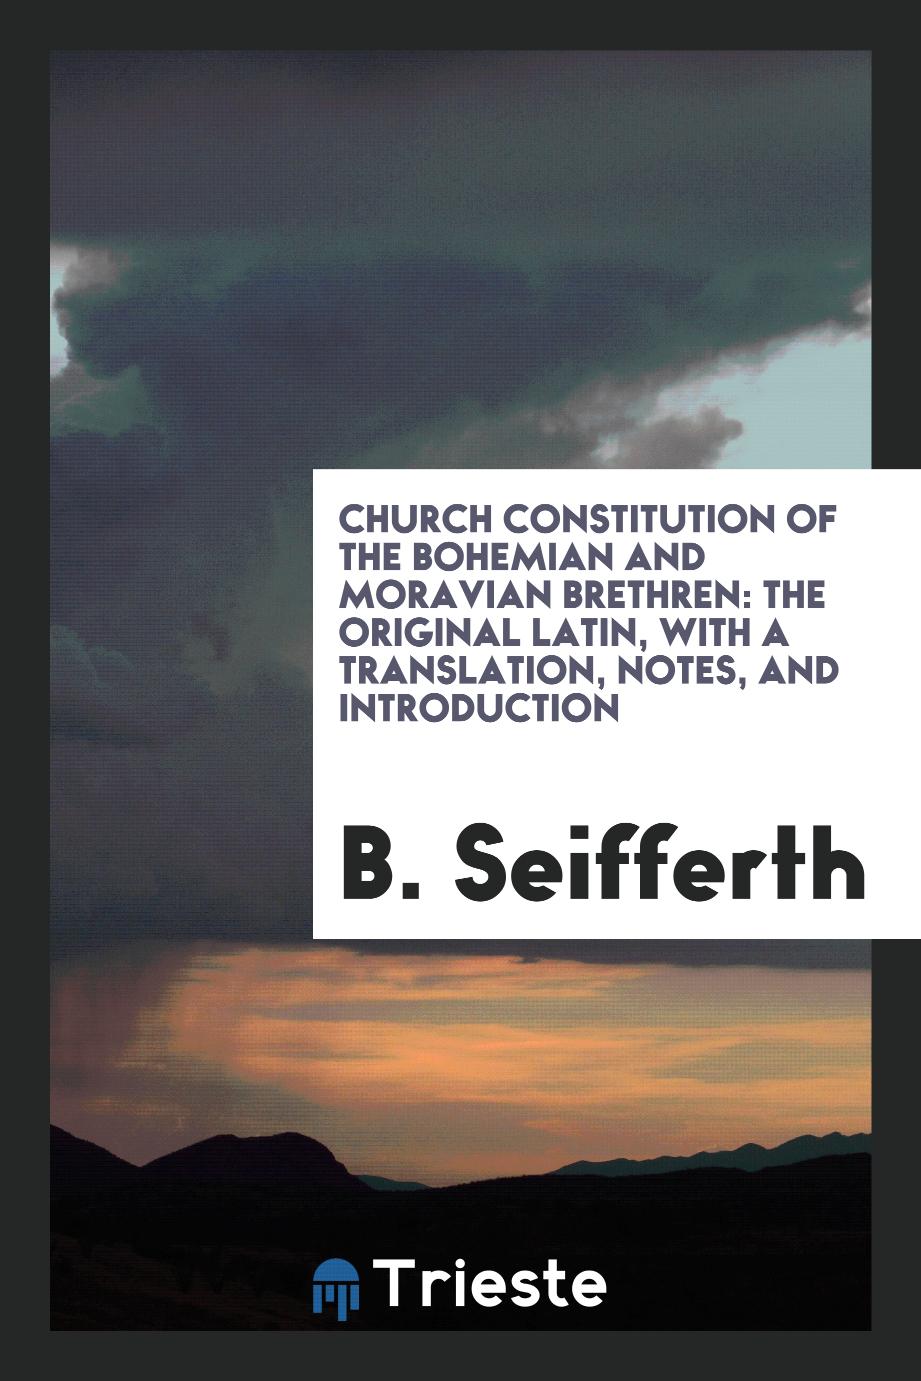 Church Constitution of the Bohemian and Moravian Brethren: The Original Latin, with a Translation, Notes, and Introduction